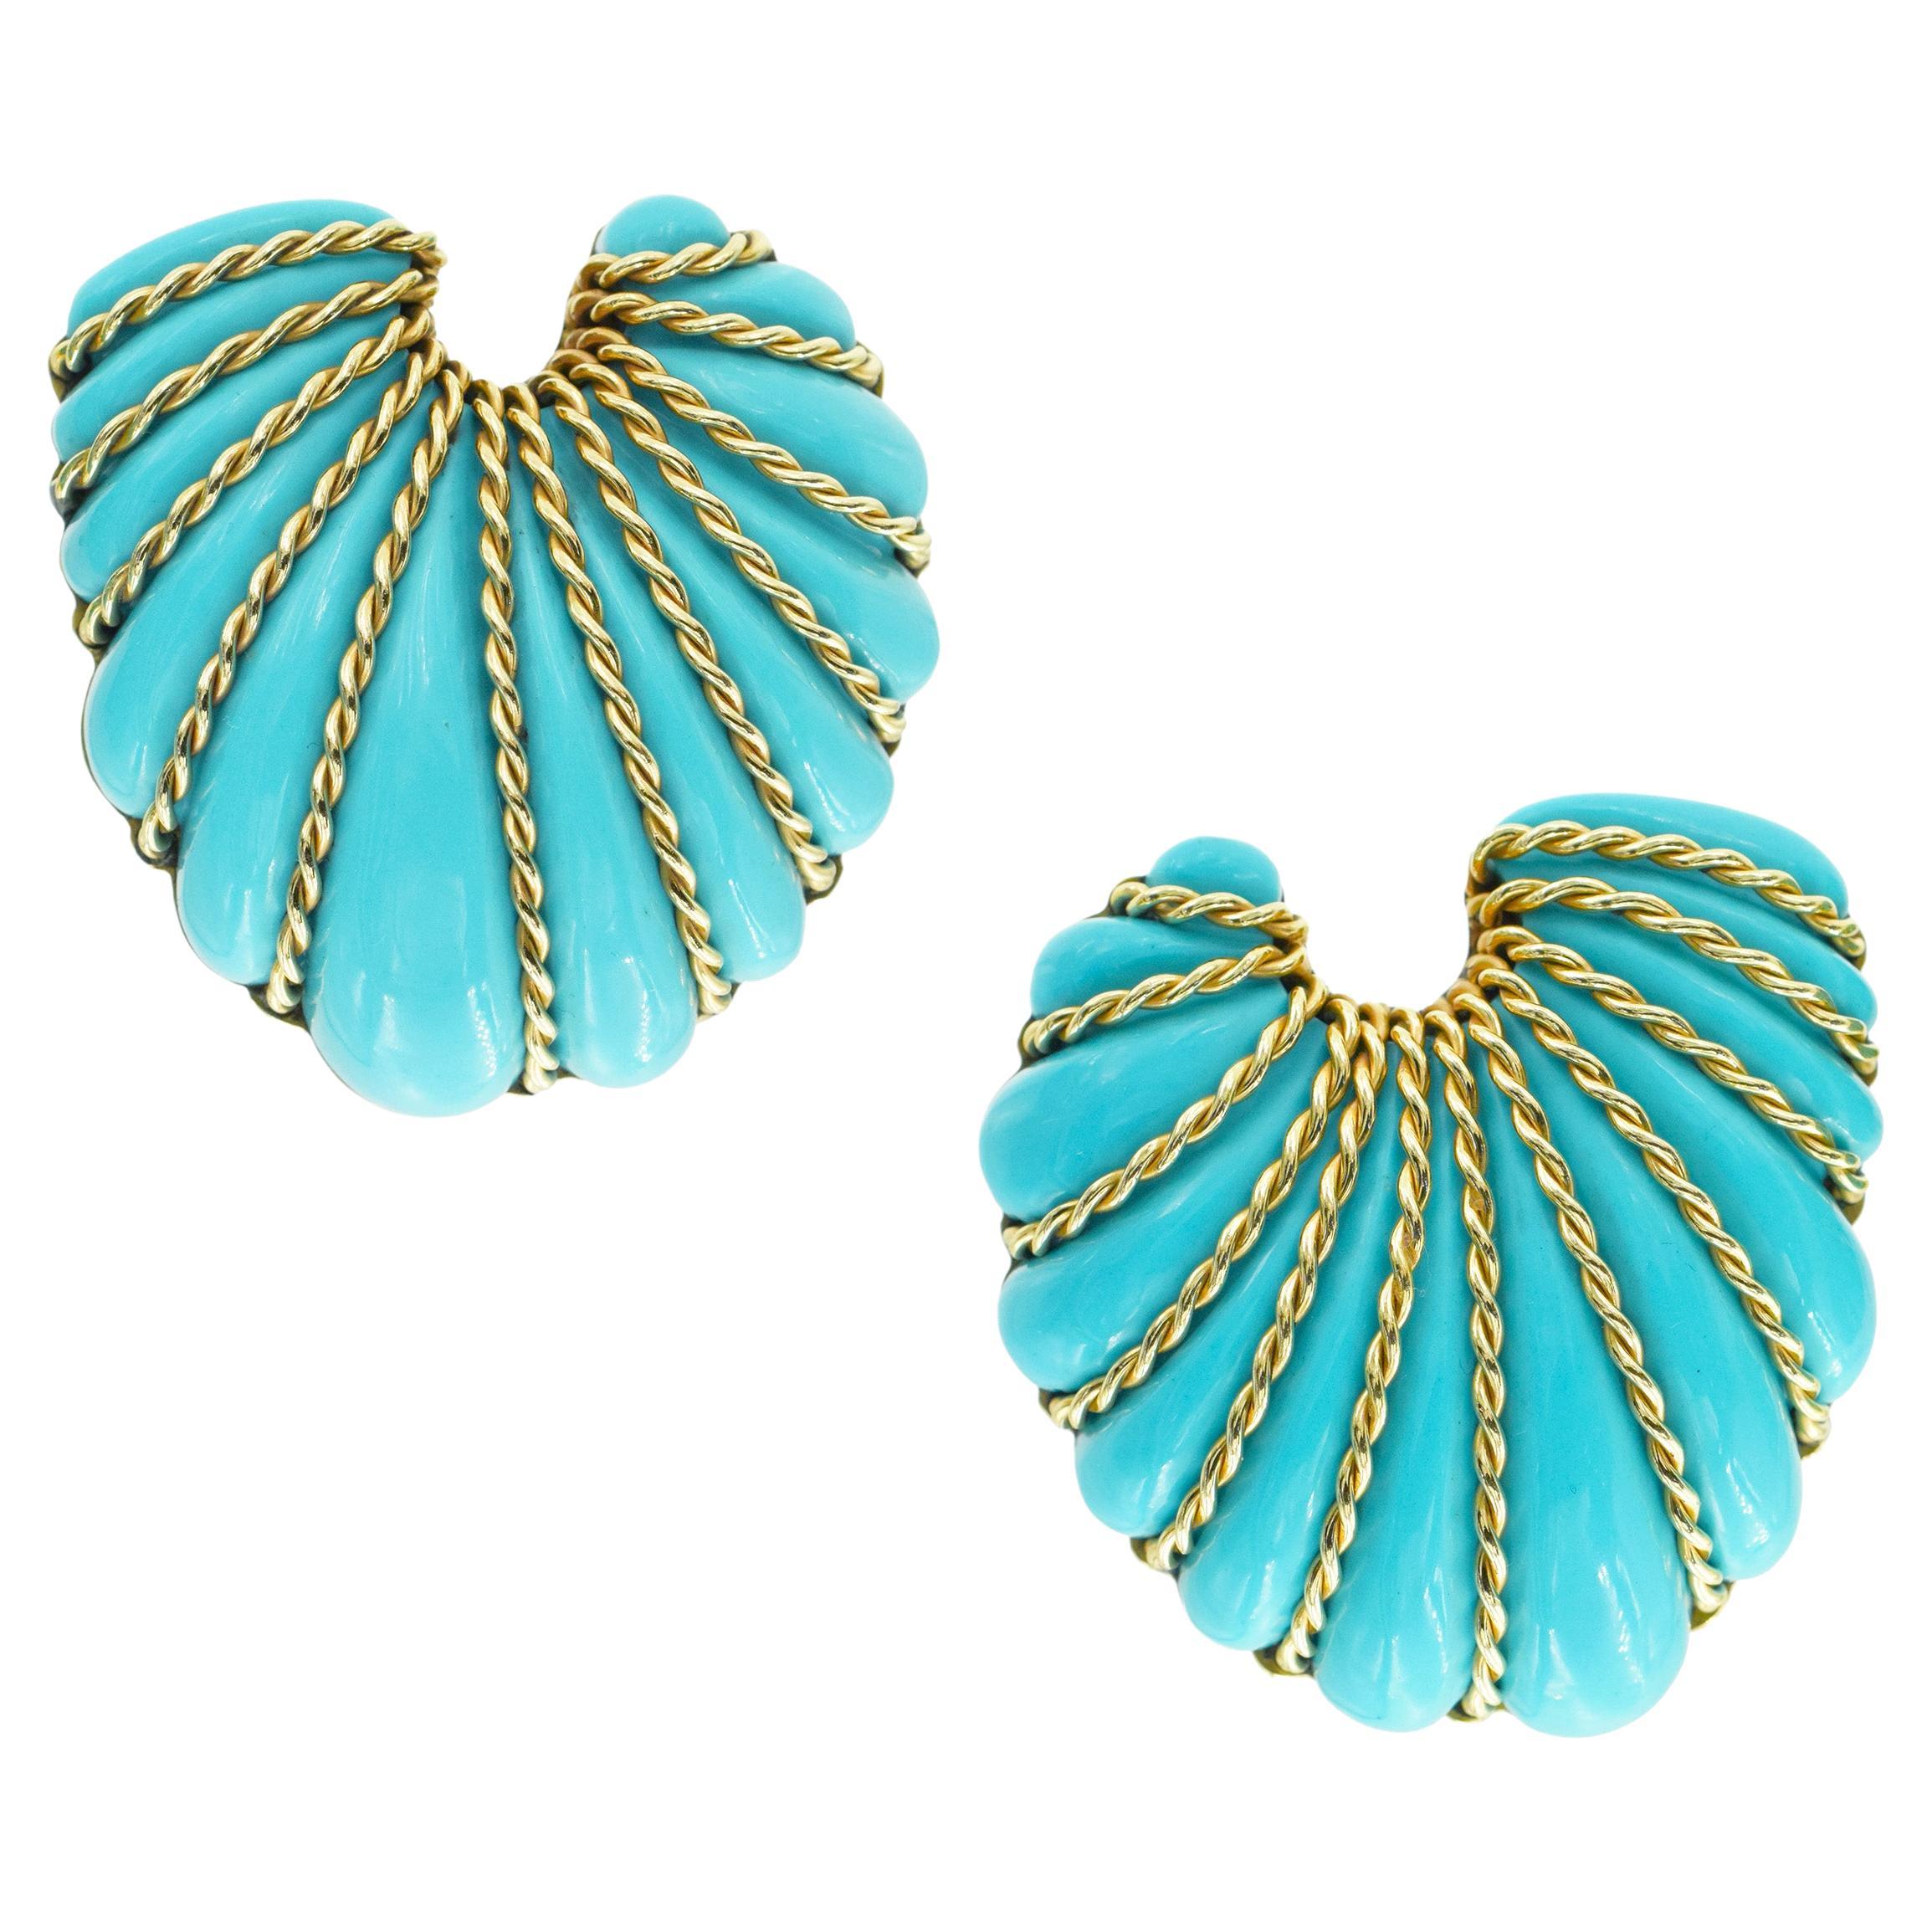 Seaman Schepps Pair of Gold and Turquoise Shell Brooches For Sale